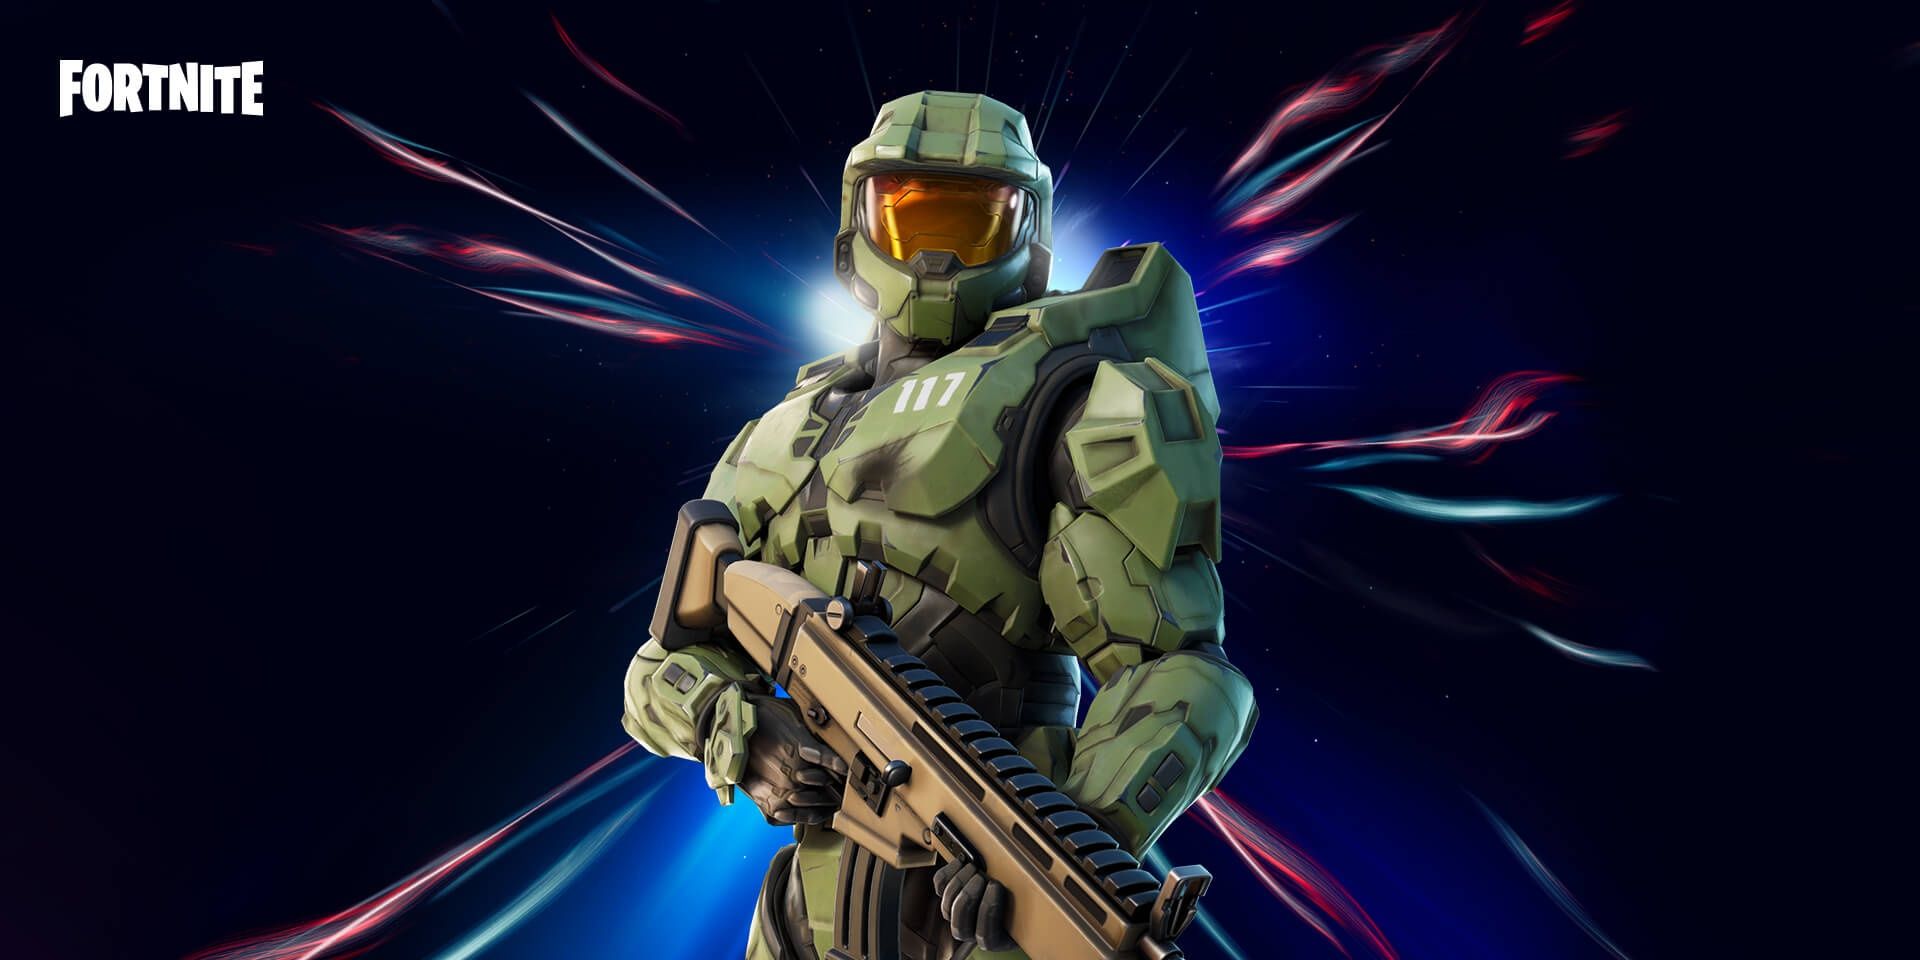 master chief from halo in fortnite